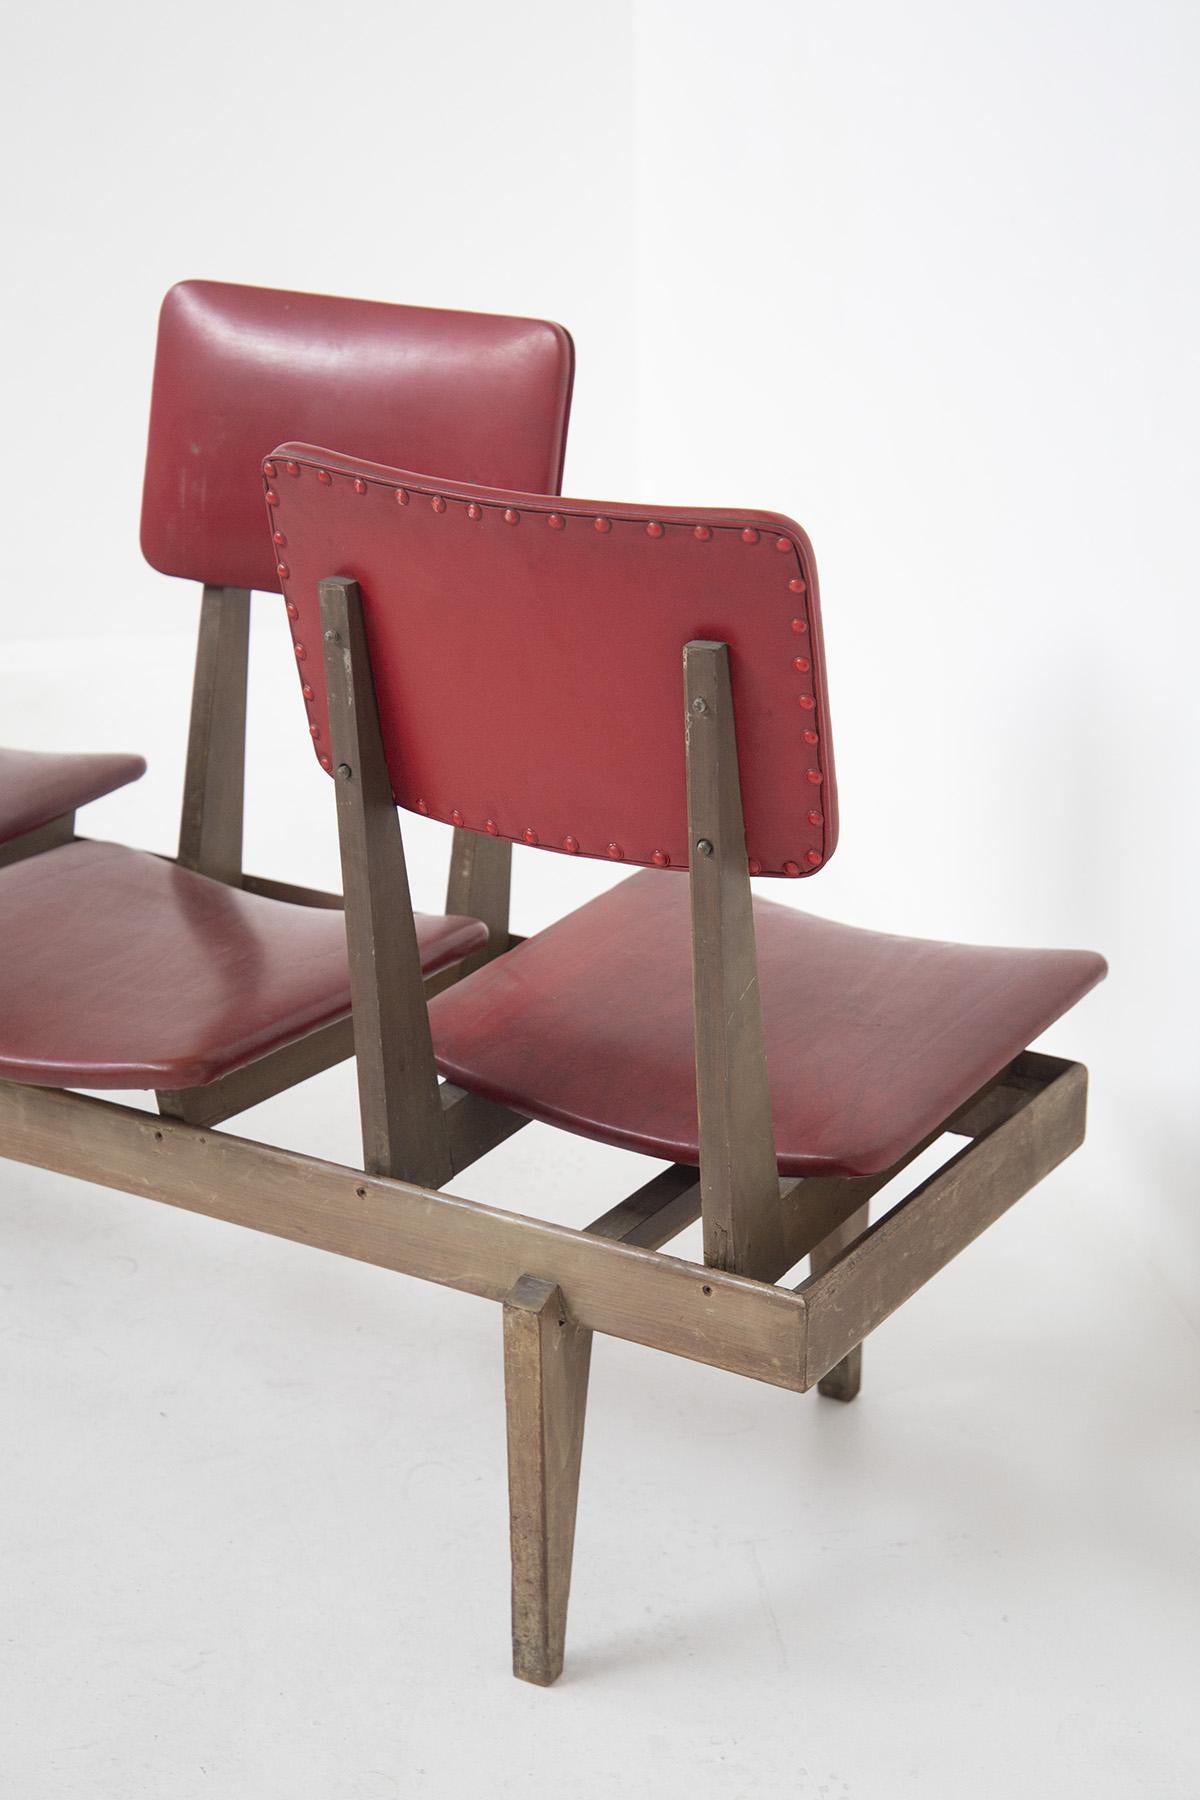 Mid-20th Century Italian Vintage Bench with Red Leather Seats For Sale